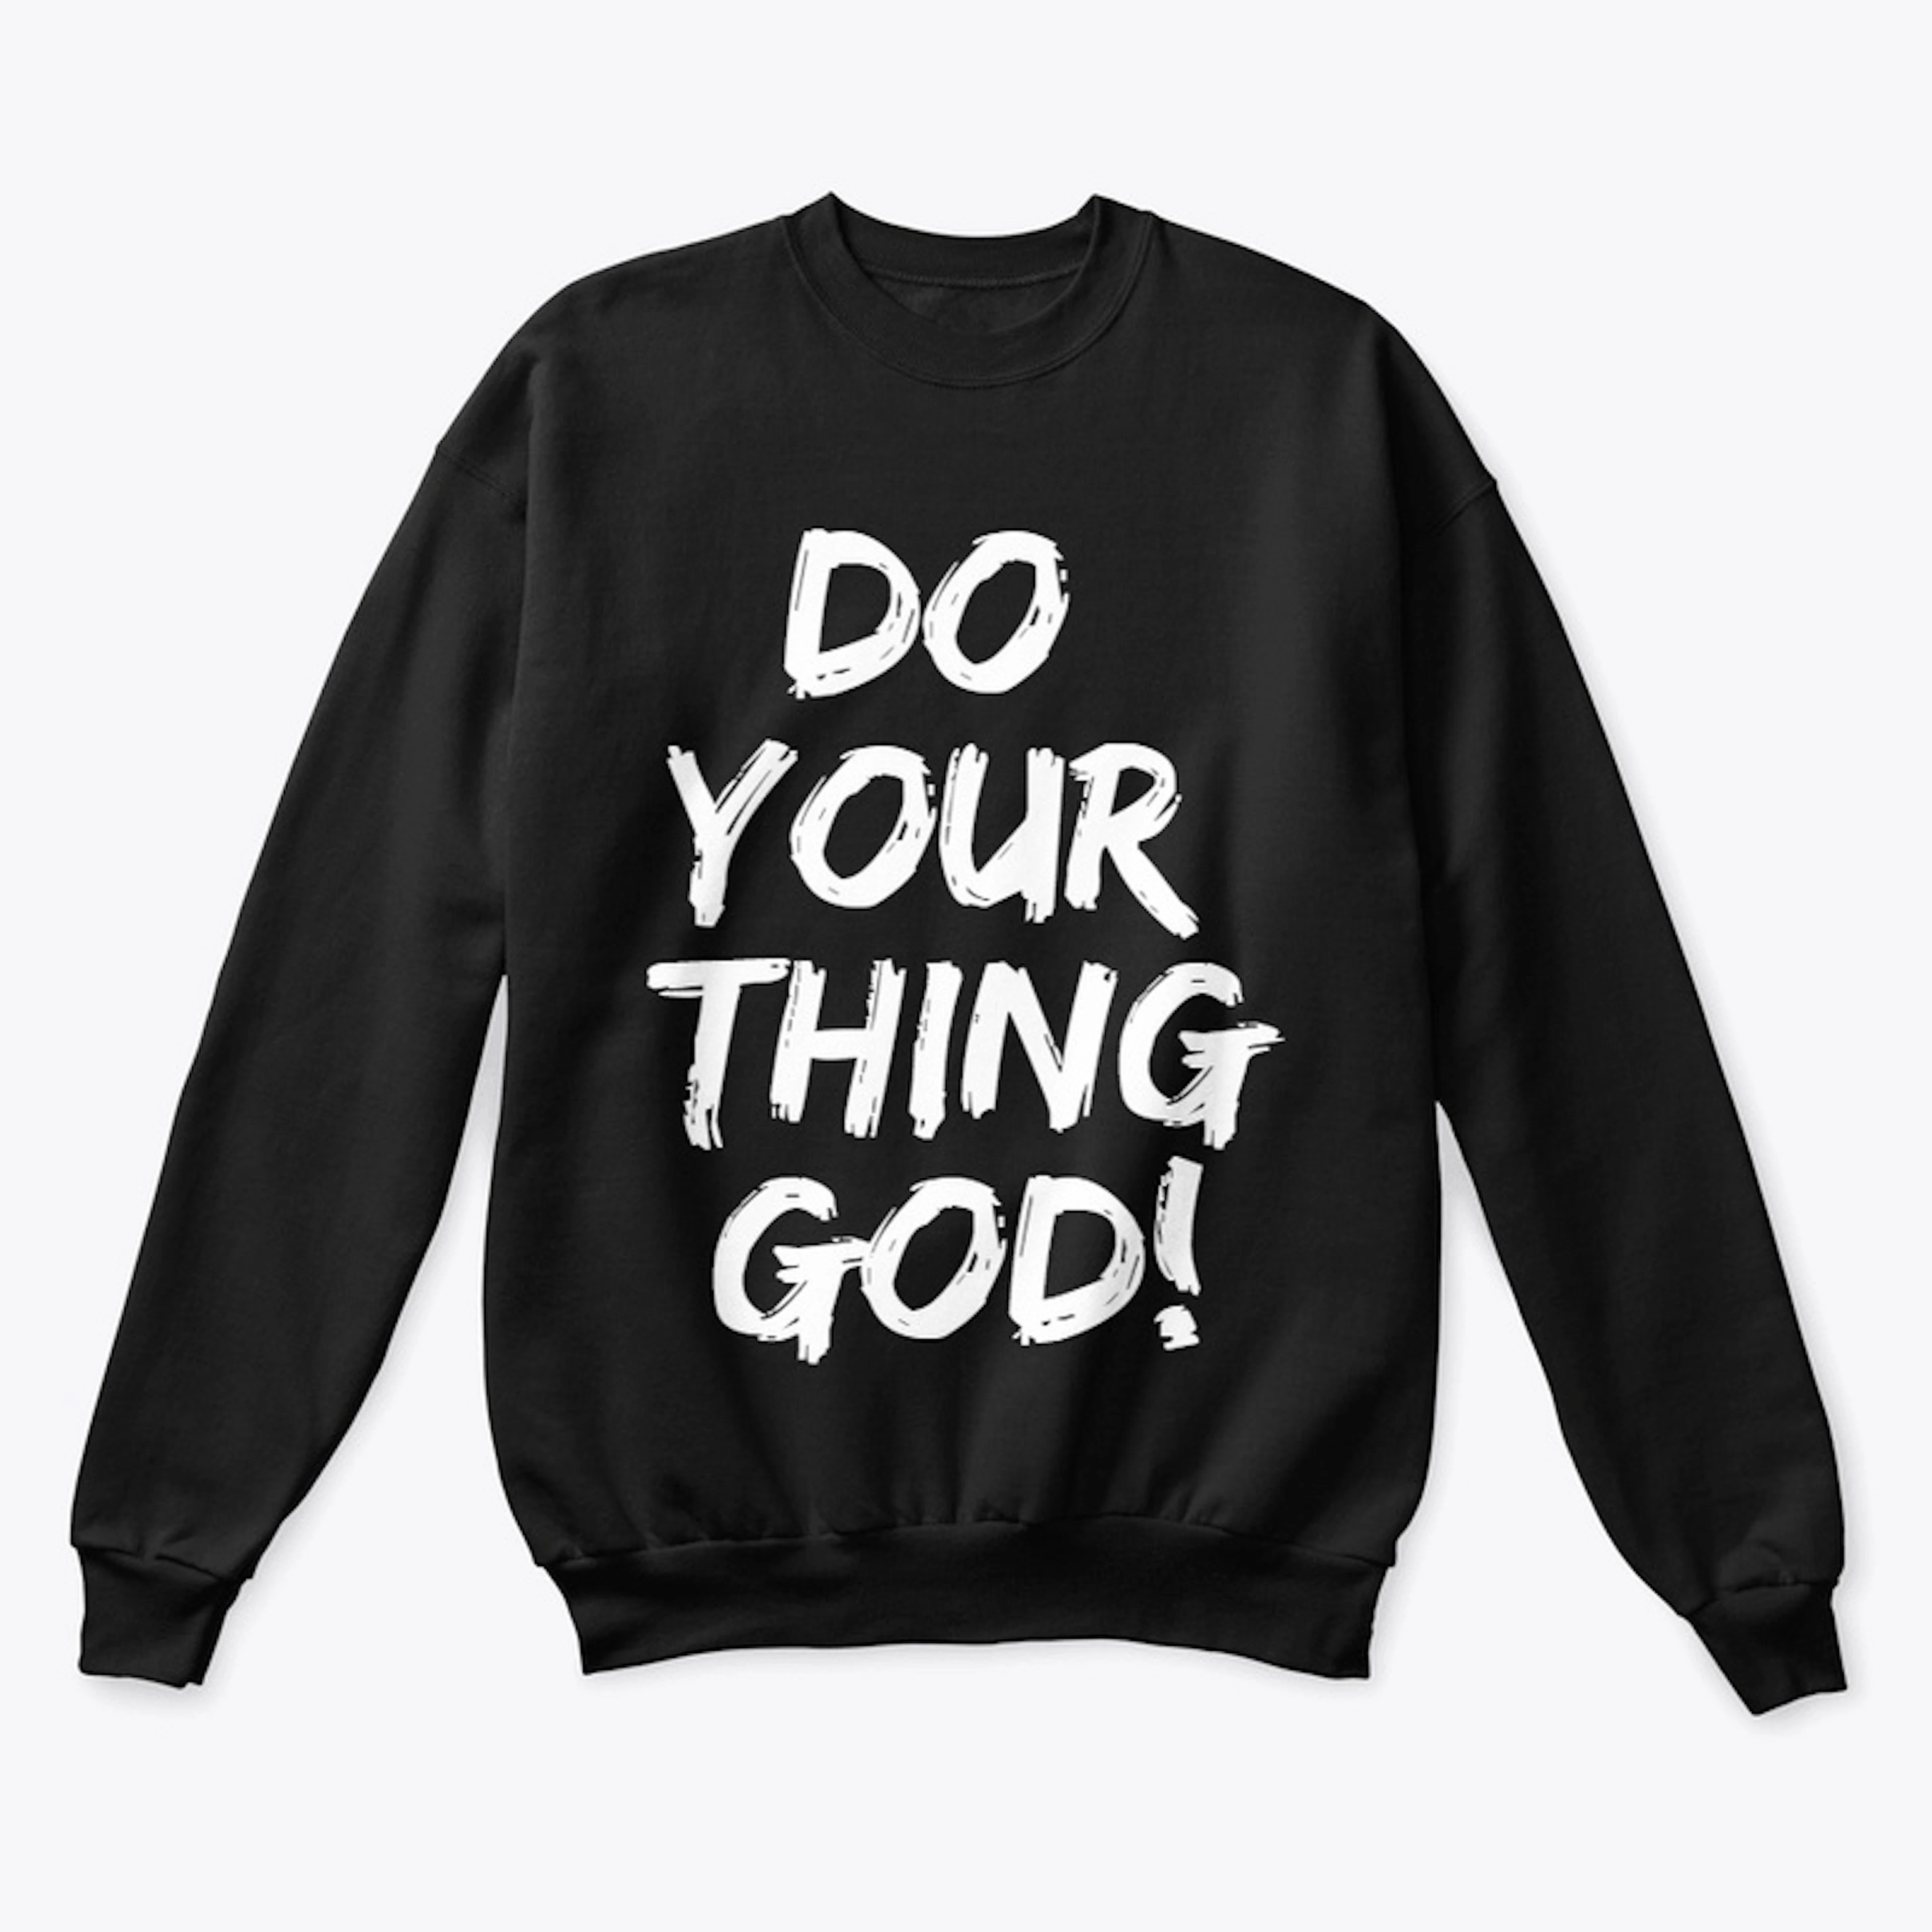 DO YOUR THING GOD!